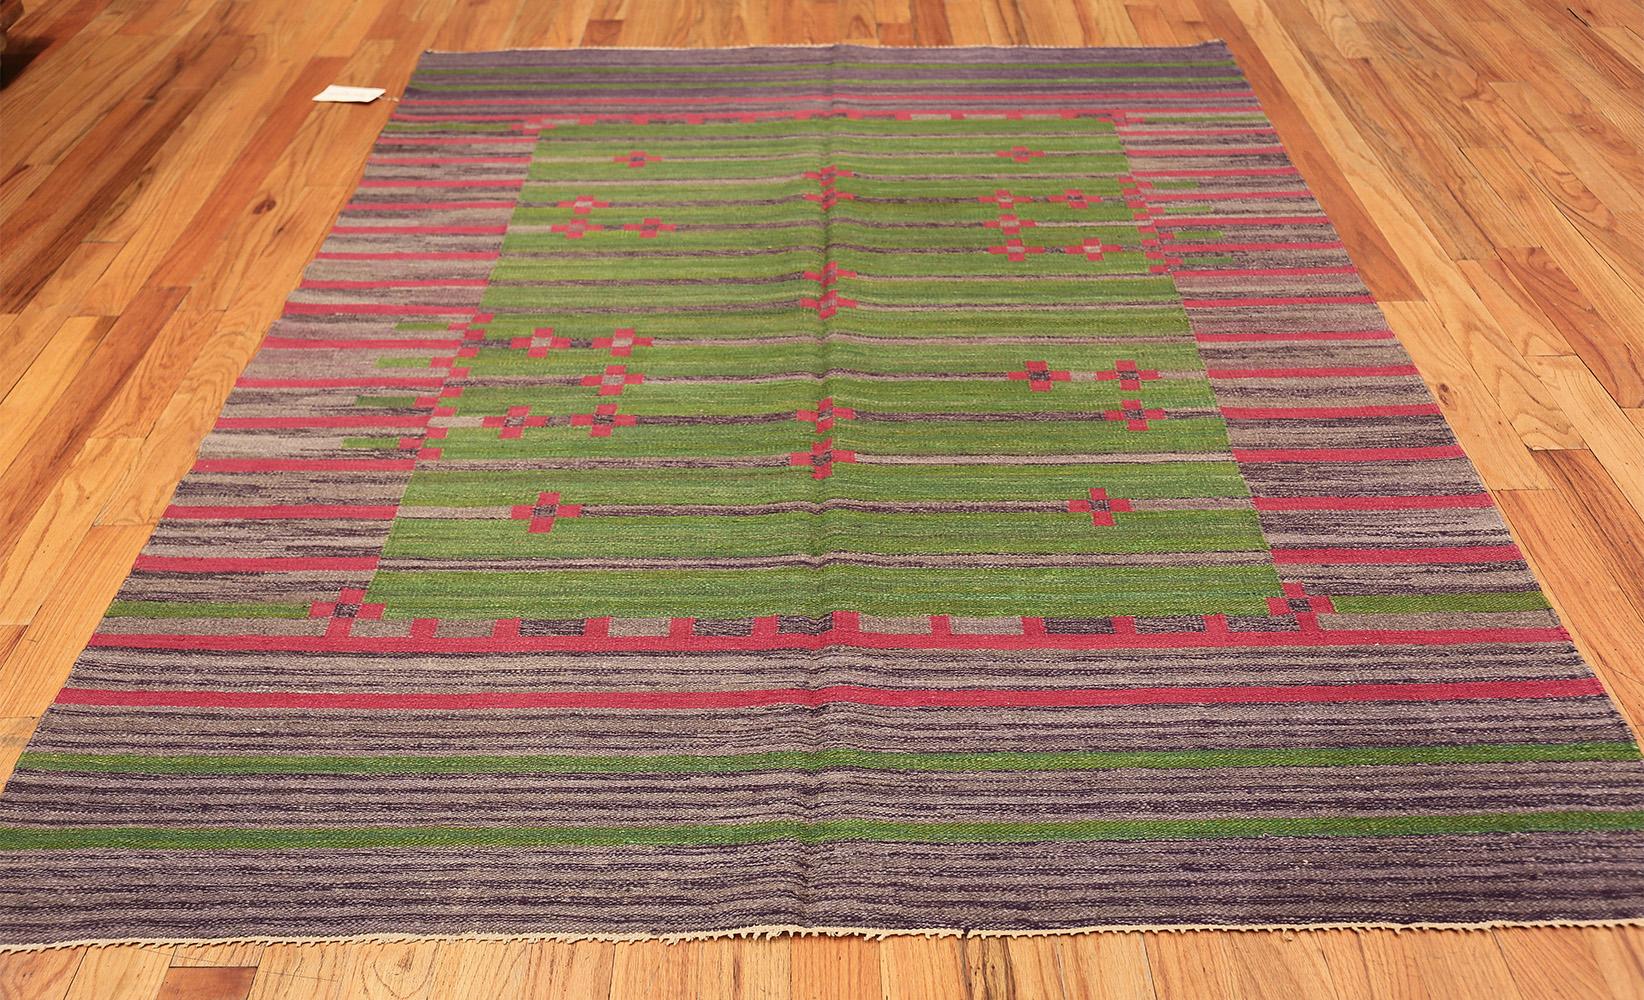 Boldly decorated and vividly colored, this evocative vintage Swedish Kilim features a stunning striated background that incorporates a rich variety of fuchsia pinks, violet hues and fresh green accents. The lively composition displays a cheerful,